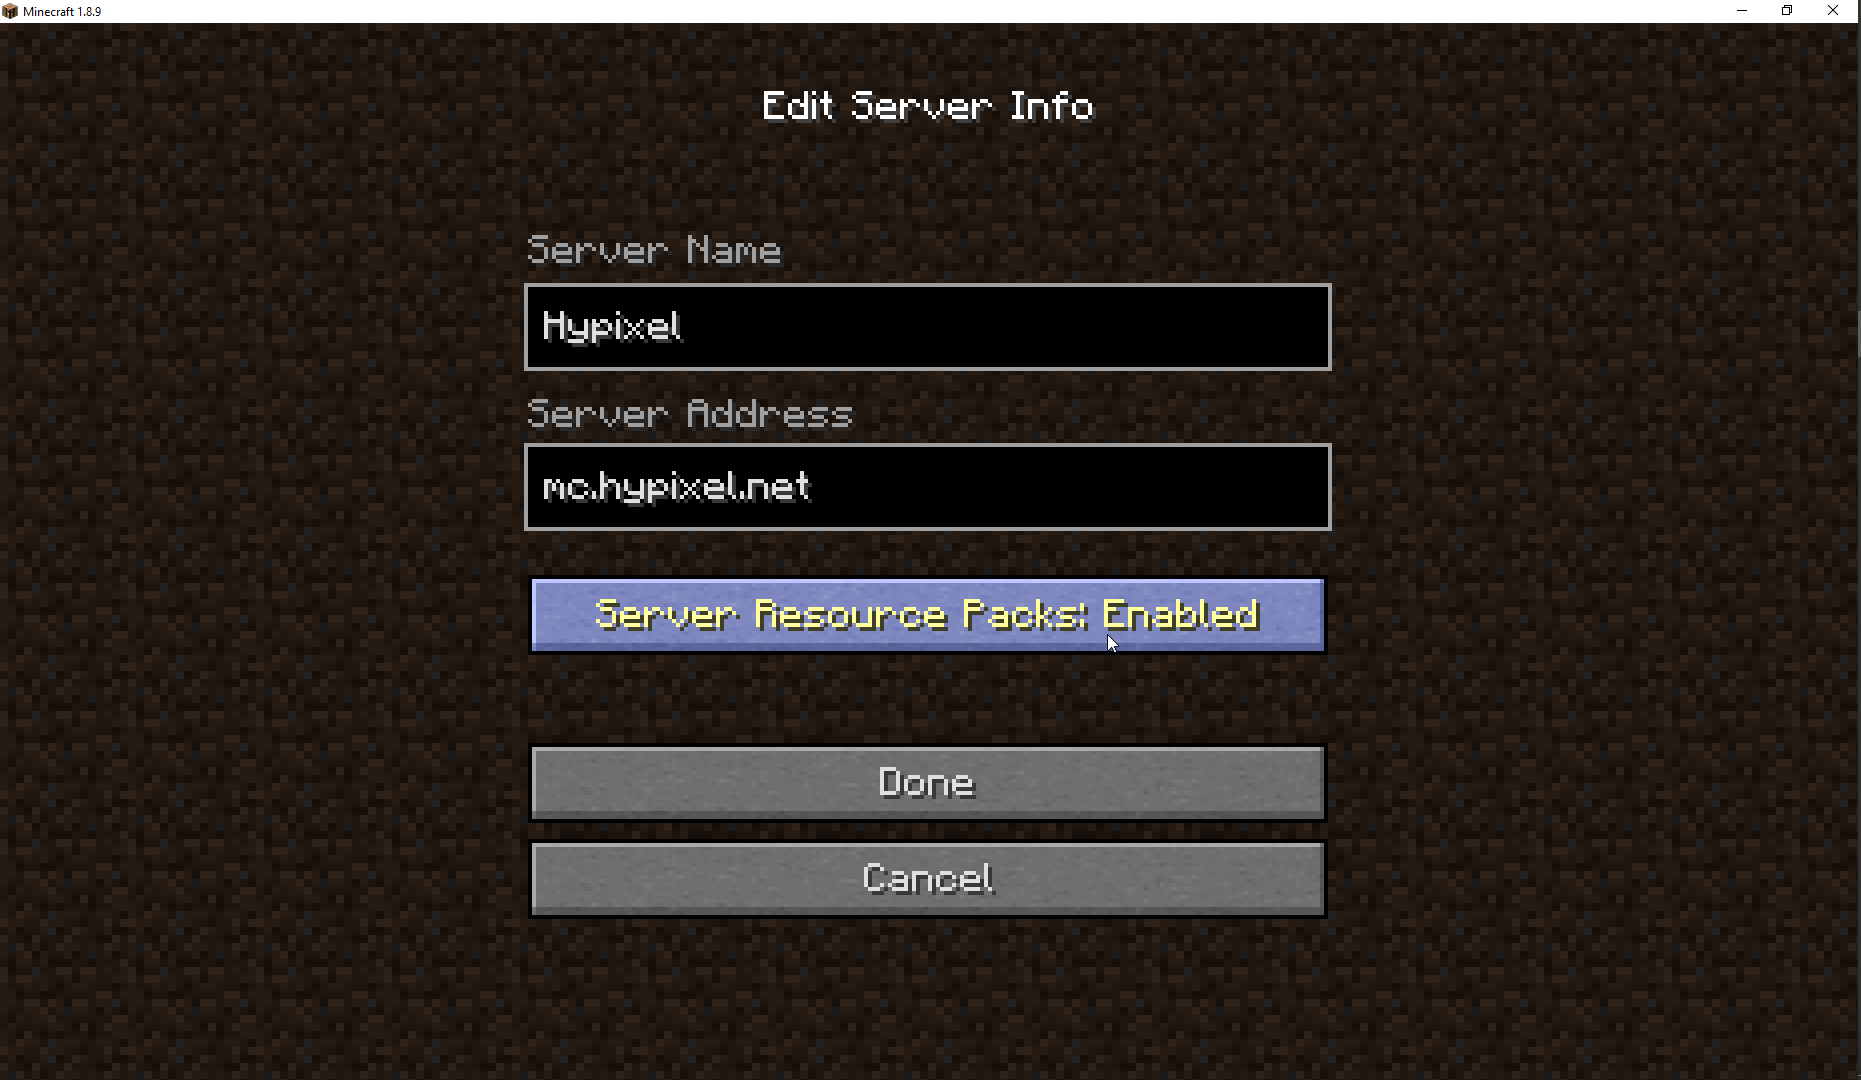 Server Resource Pack Issues